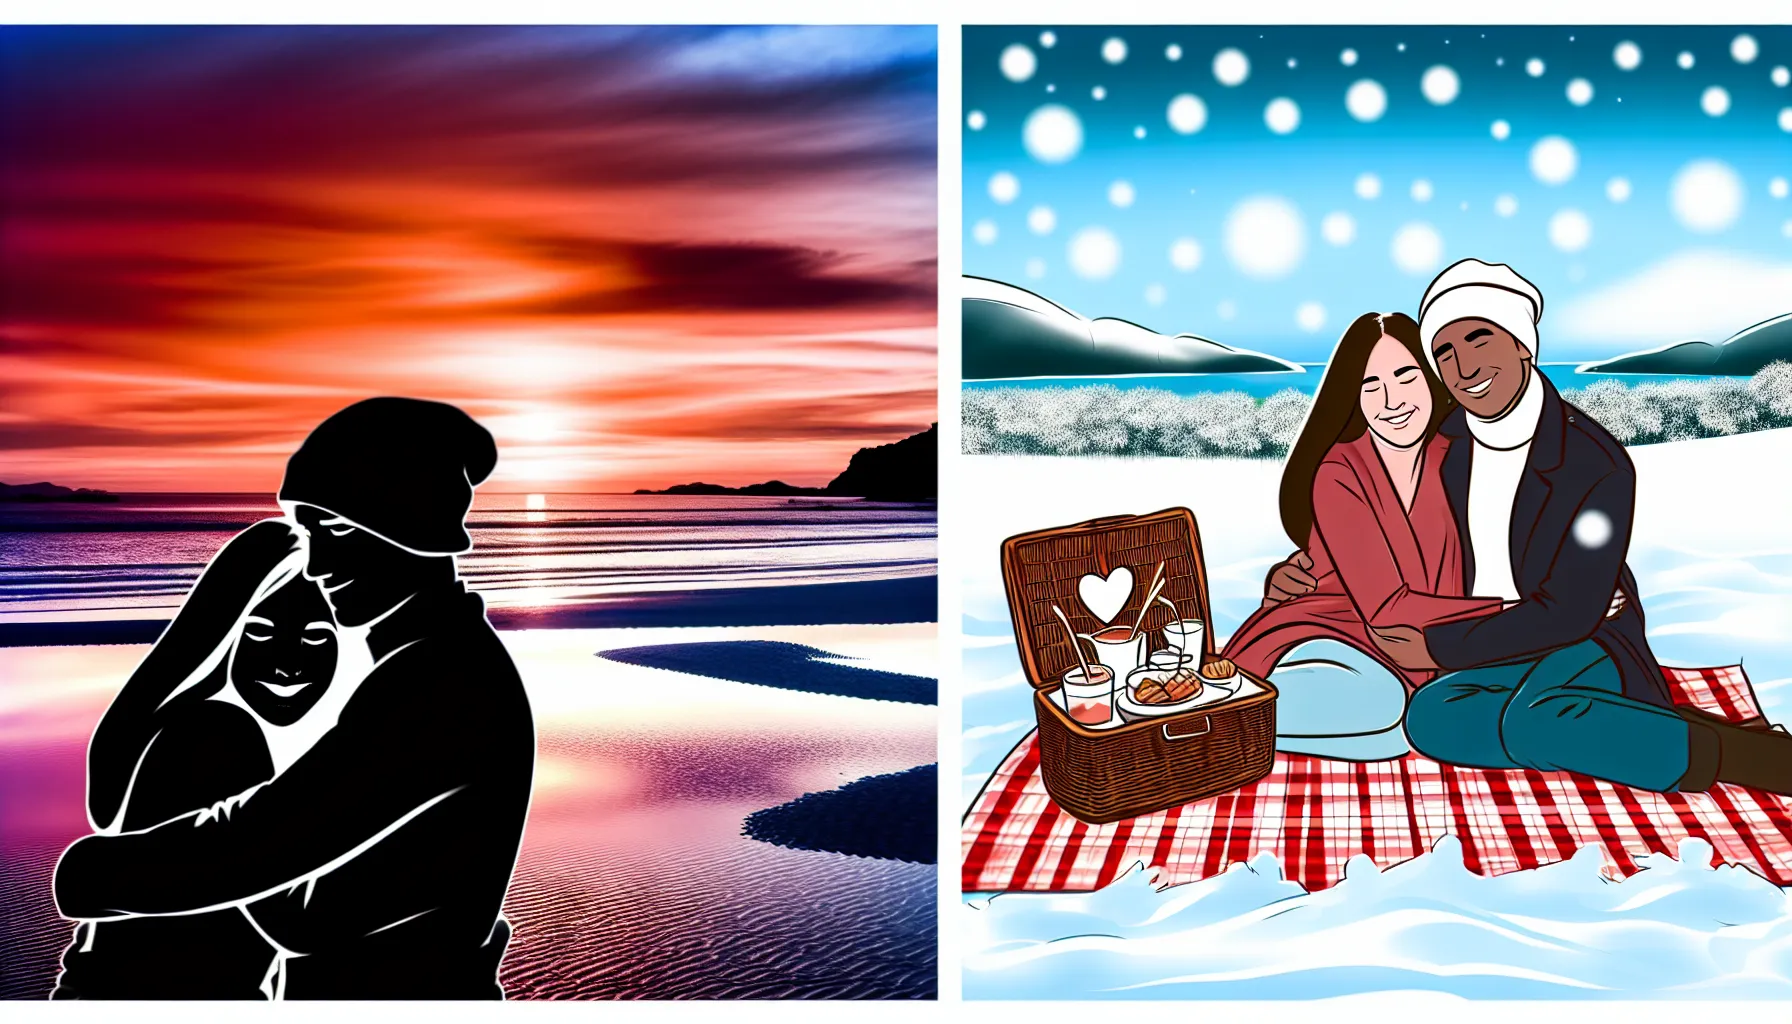 <strong>From the sun's lingering kiss on the shore to the tender embrace of winter's chill,</strong> these images weave a tale of love unbound by seasons—inviting couples to bask in the glow of connection, whether caressed by seaside breezes or cocooned in a snowy alcove.